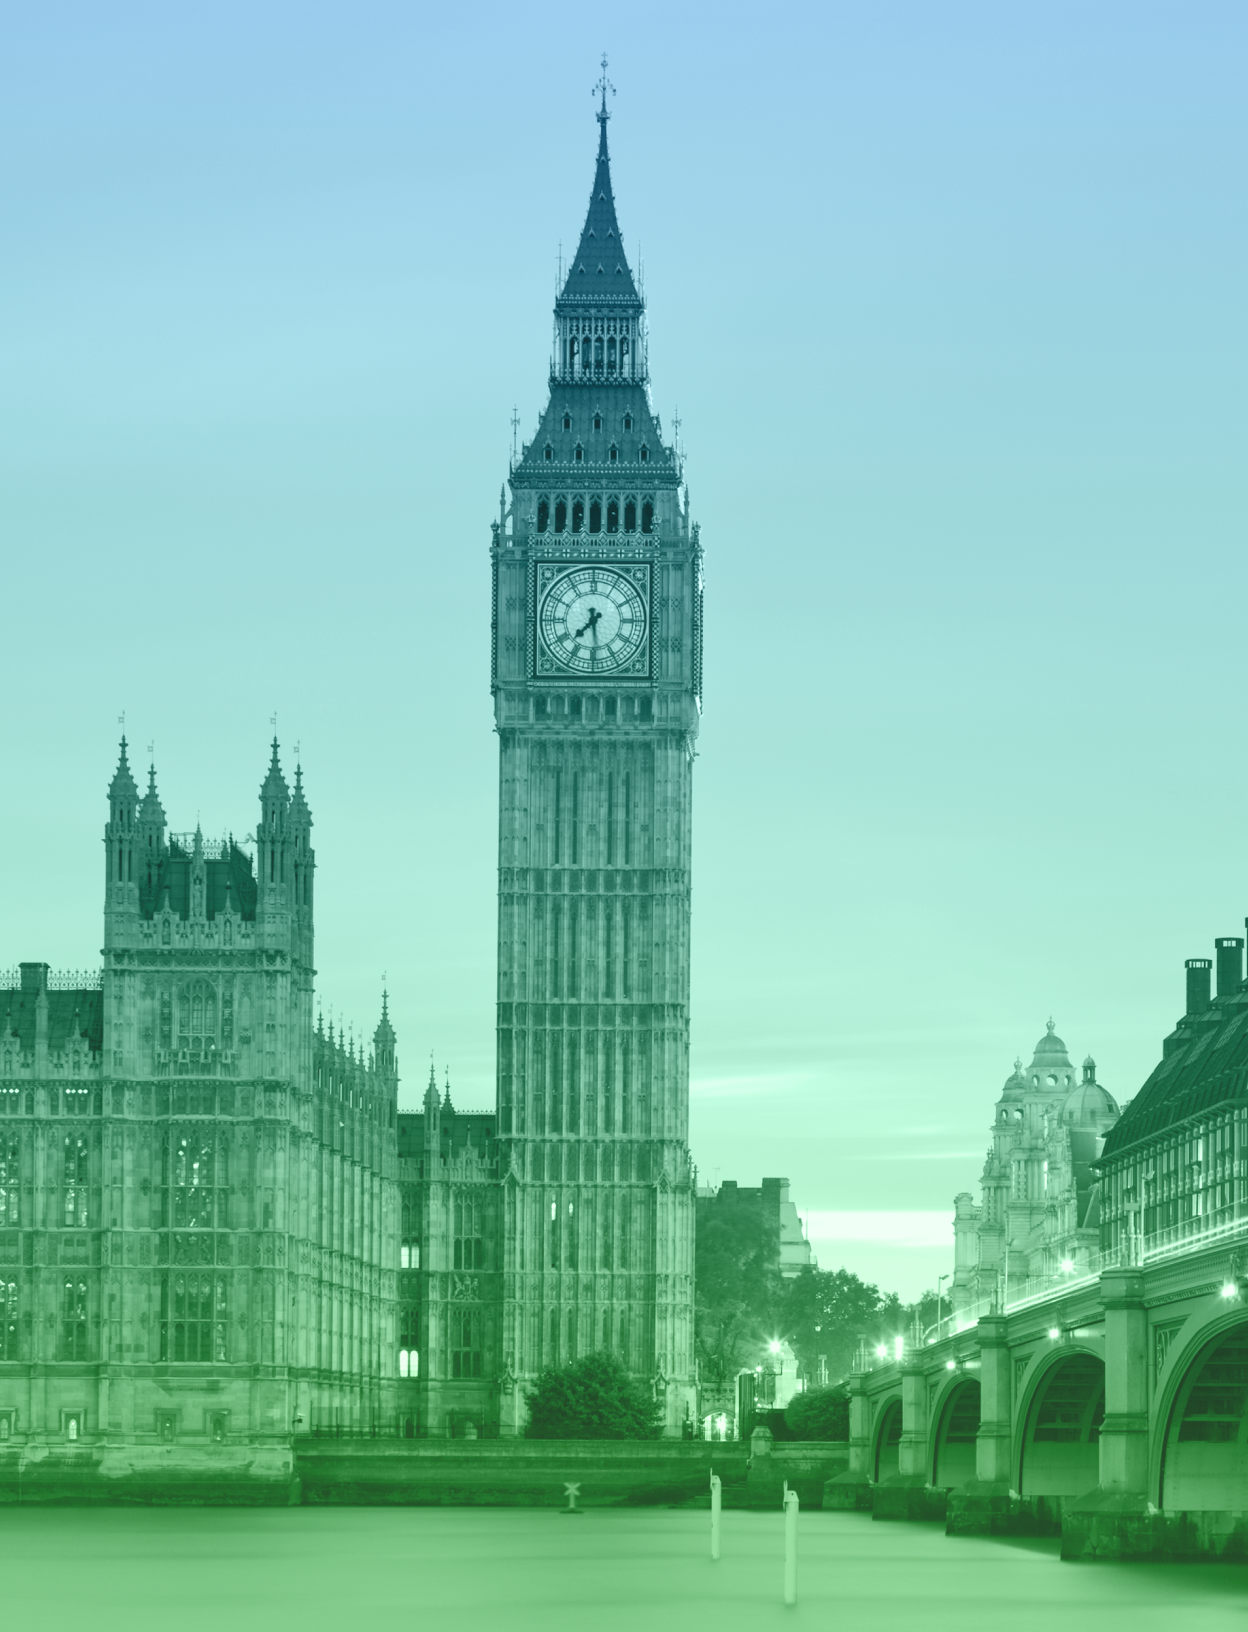 Portrait photo of Big Ben and the Palace of Westminister on the Thames in London with a blue-green gradient overlay